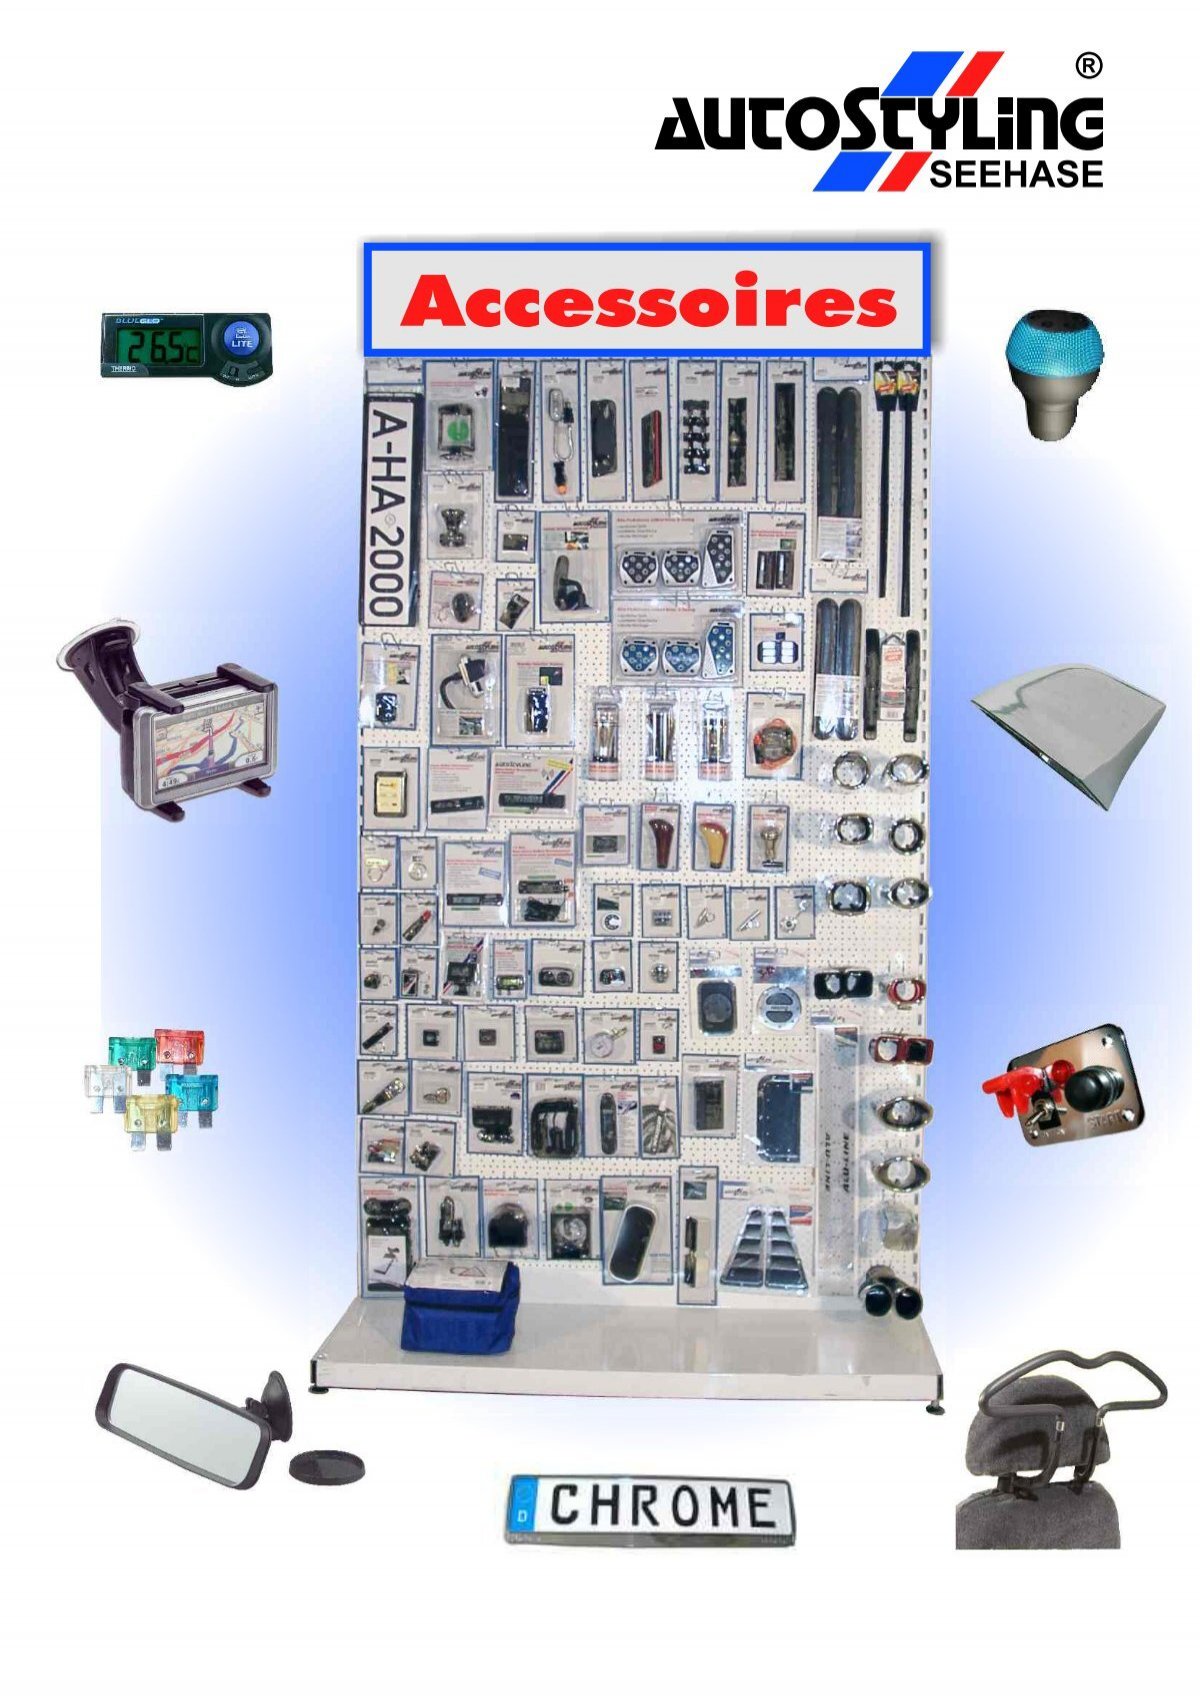 Accessoires 2011 X3.cdr - Seehase